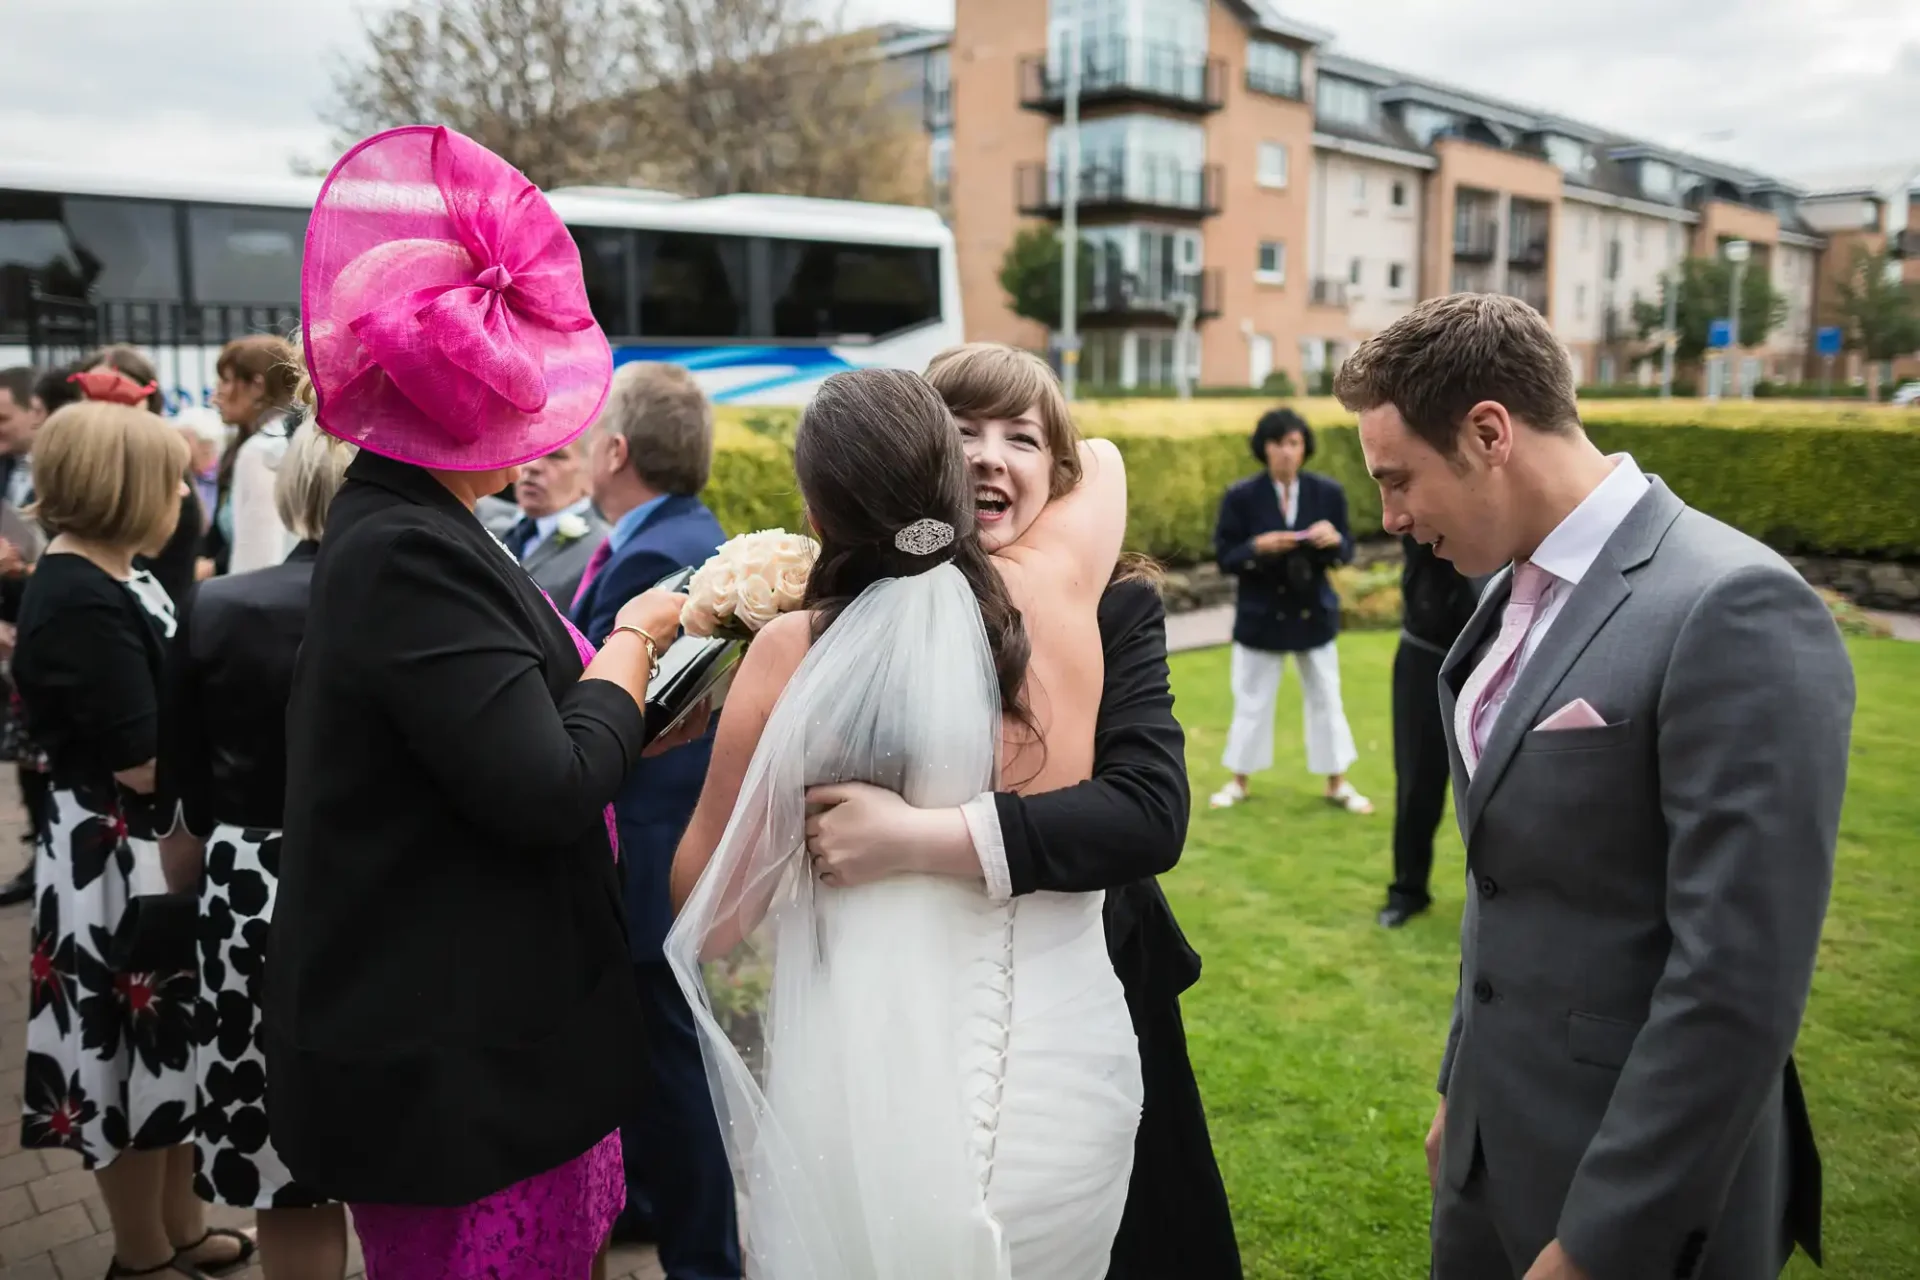 A bride in a white dress embraces a woman in a pink hat while others, including a man in a suit, look on at an outdoor gathering.